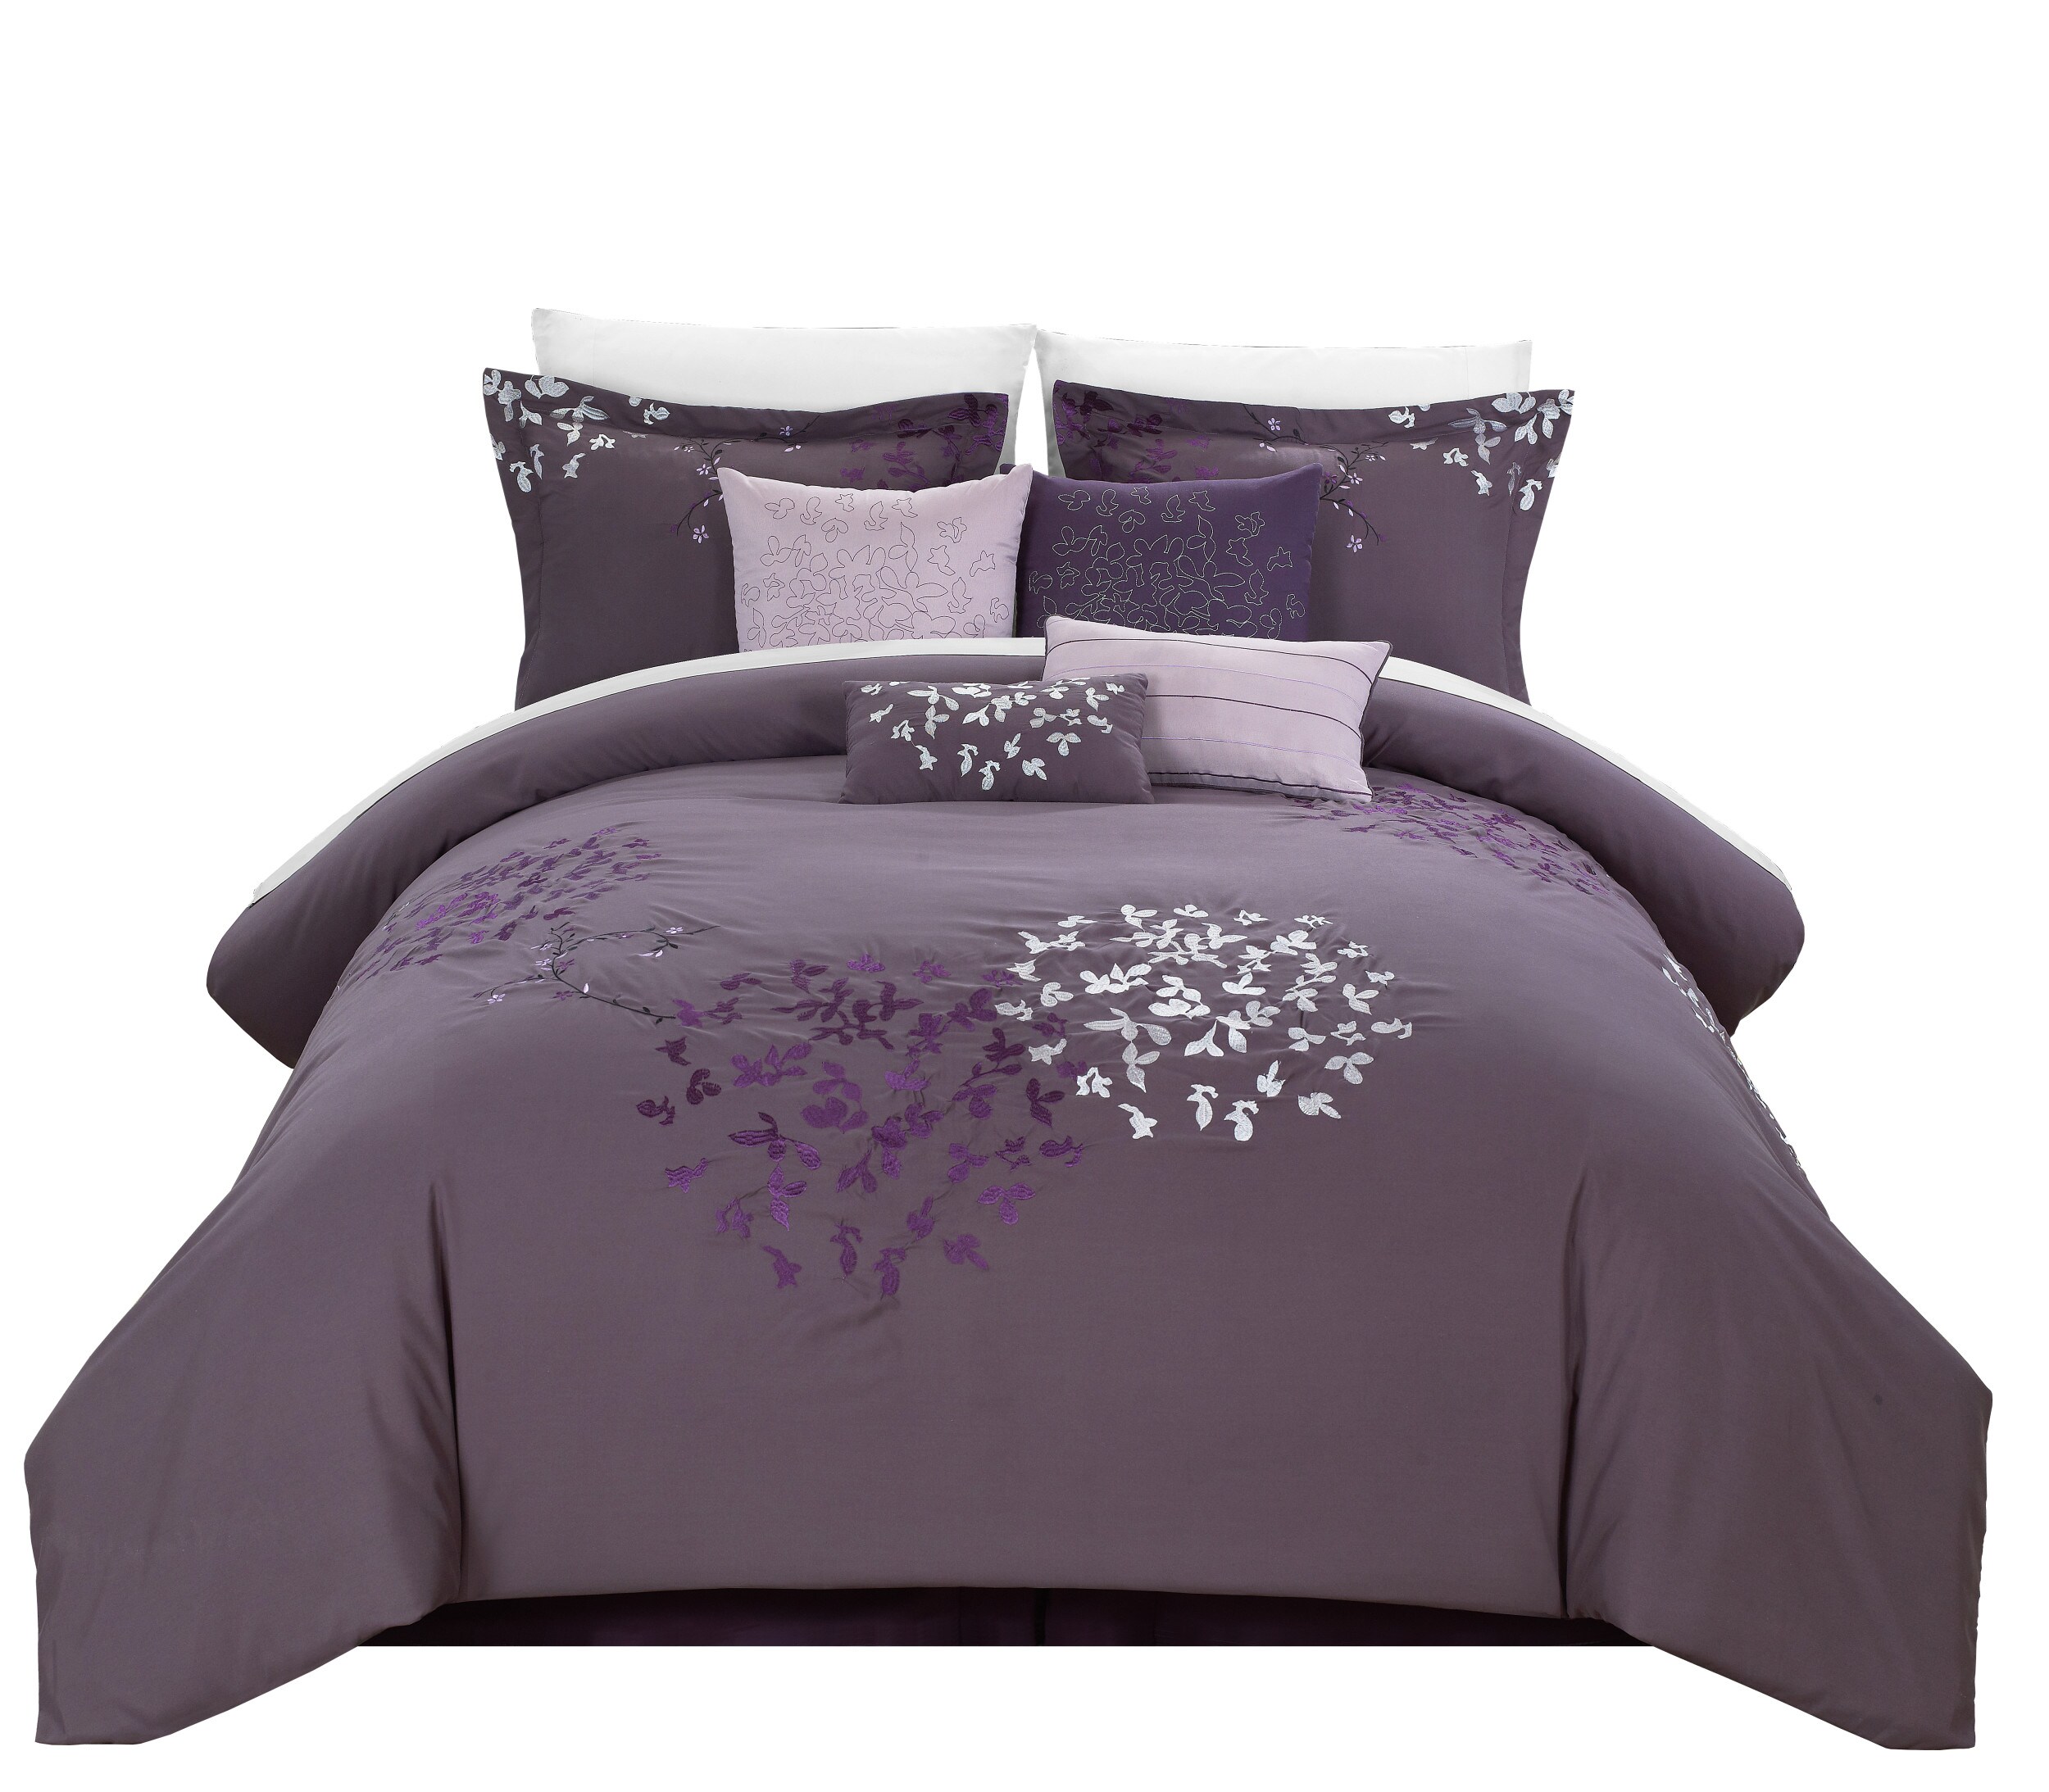 6PC Puple Flower with Leaves Printed Floral Oversize+Overfilled Comforter Set 